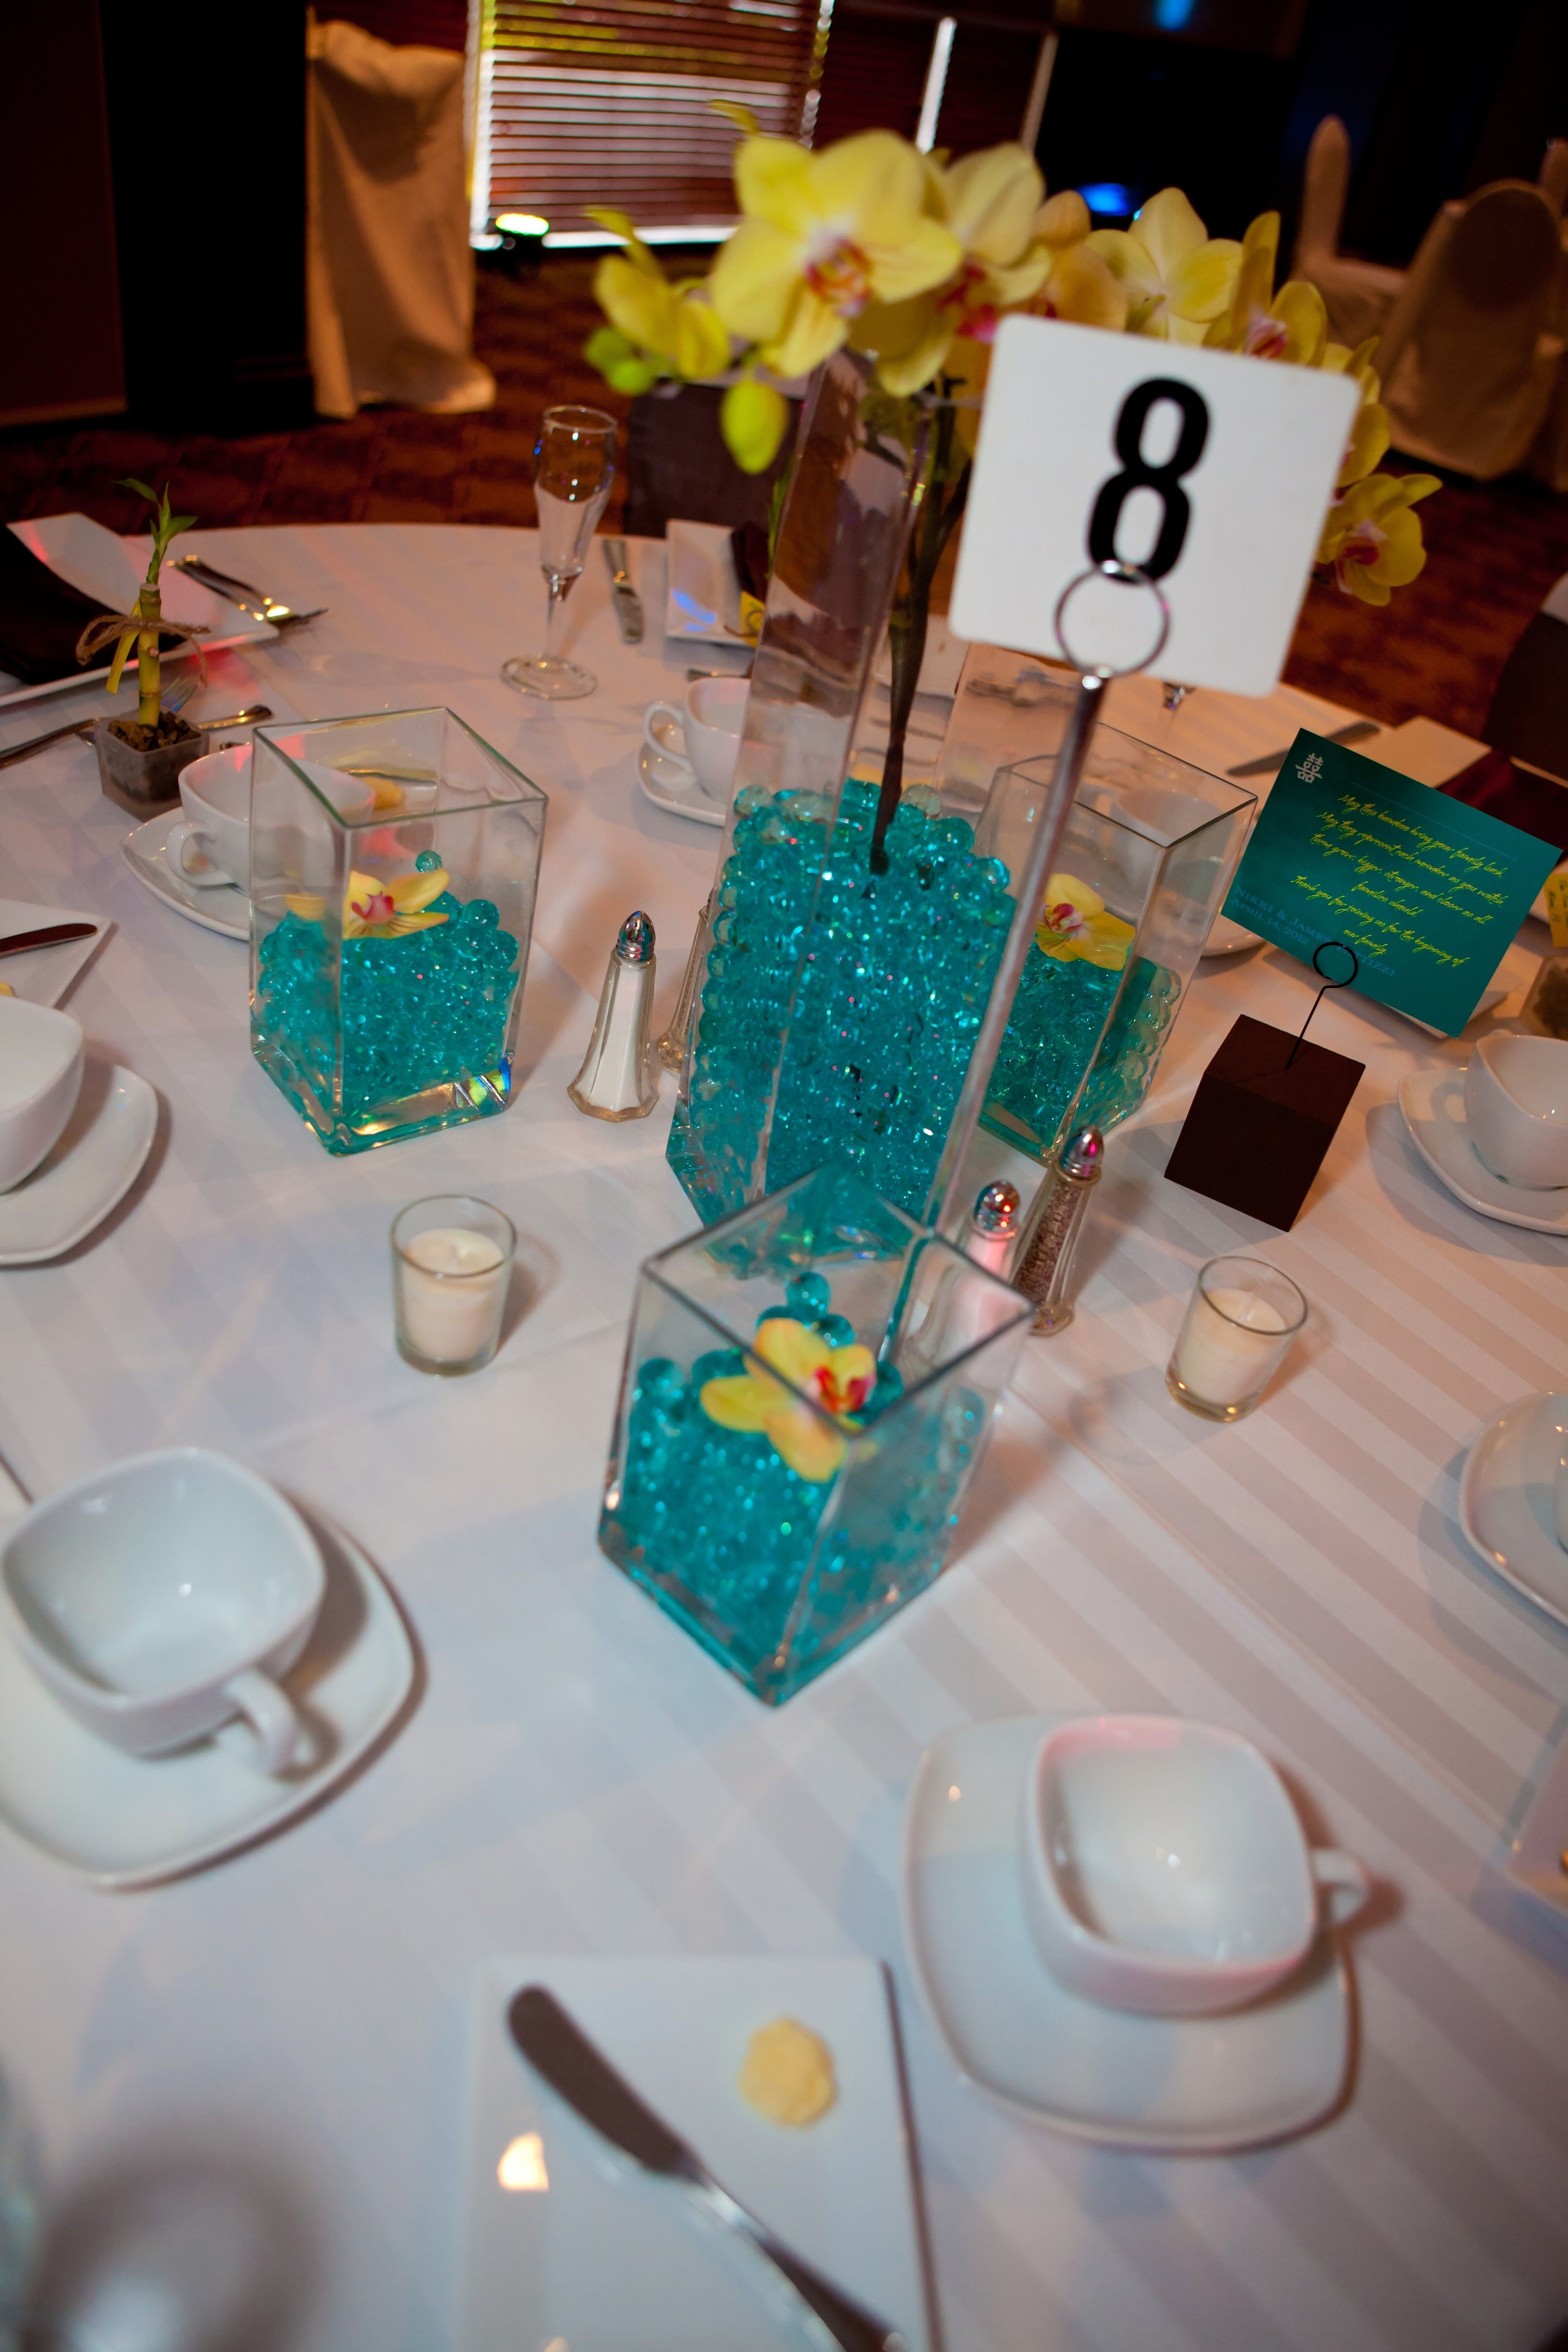 22 Fabulous Beaded Crystal Vases 2024 free download beaded crystal vases of wedding centerpieces square vases teal water beads yellow with regard to square vases teal water beads yellow orchids candles